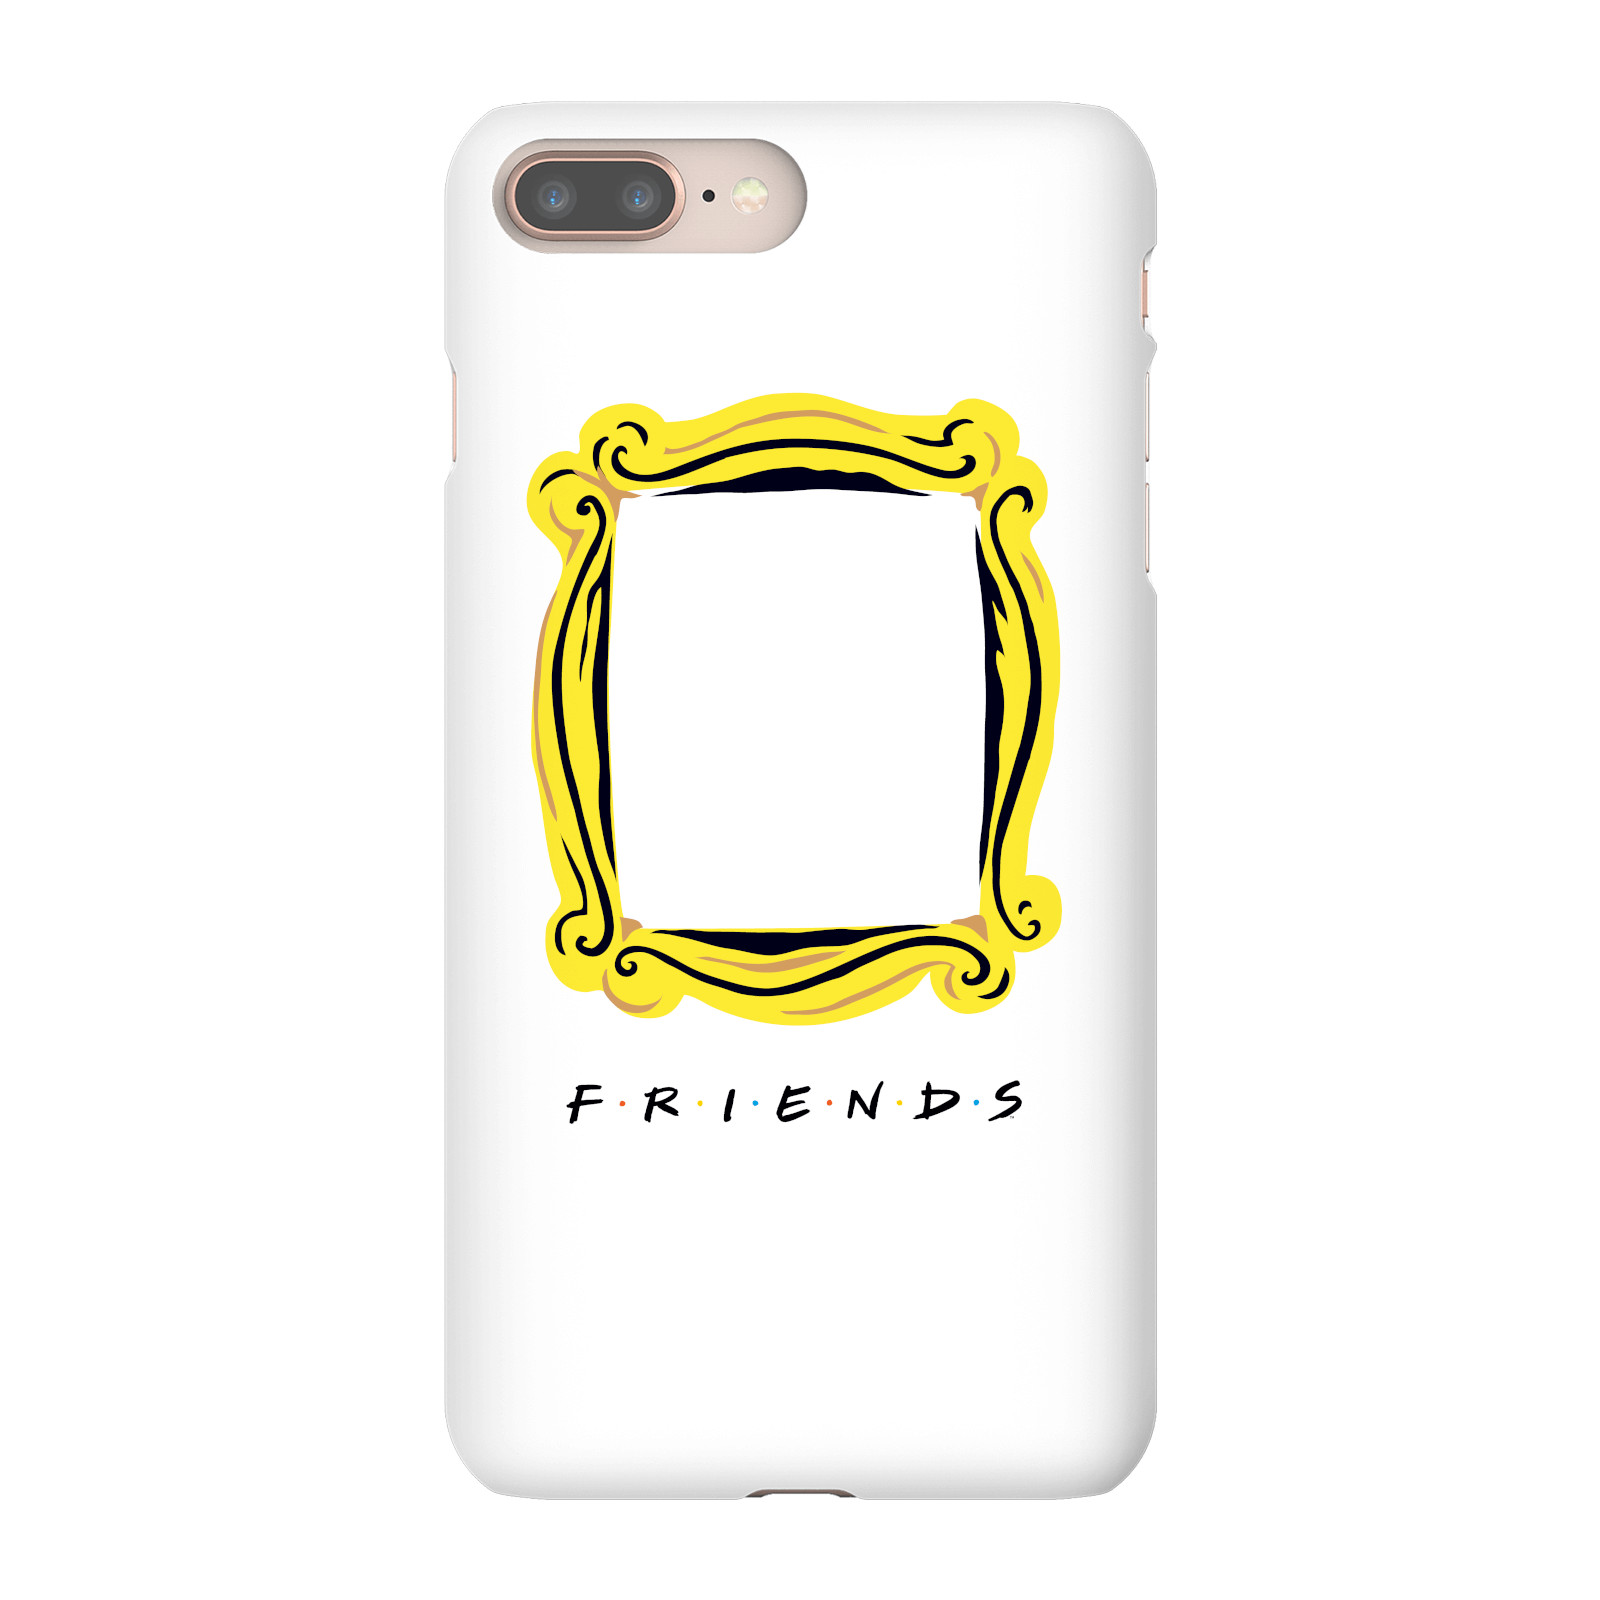 Photos - Case Frame Friends  Phone  for iPhone and Android - Samsung S6 Edge - Snap C 